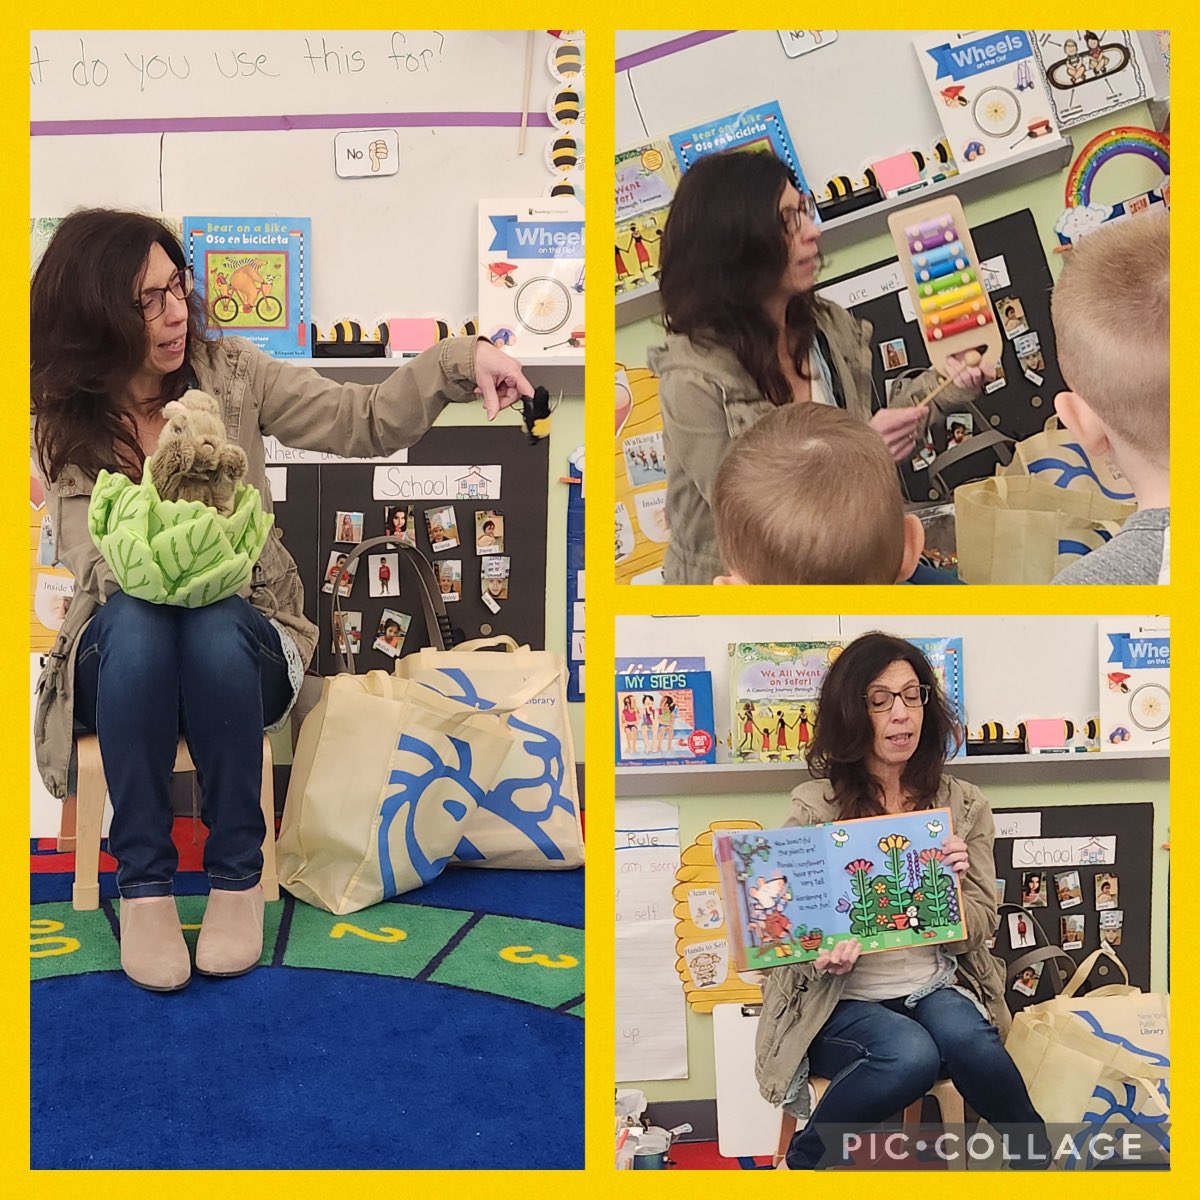 2389 Richmond ave enjoyed a visit from Librarian Amy. Puppets, music and stories spring is in the air. @DrJoyAbrams @AP_JelaniMiller @DrMarionWilson @CSD31SI @NYCSchools